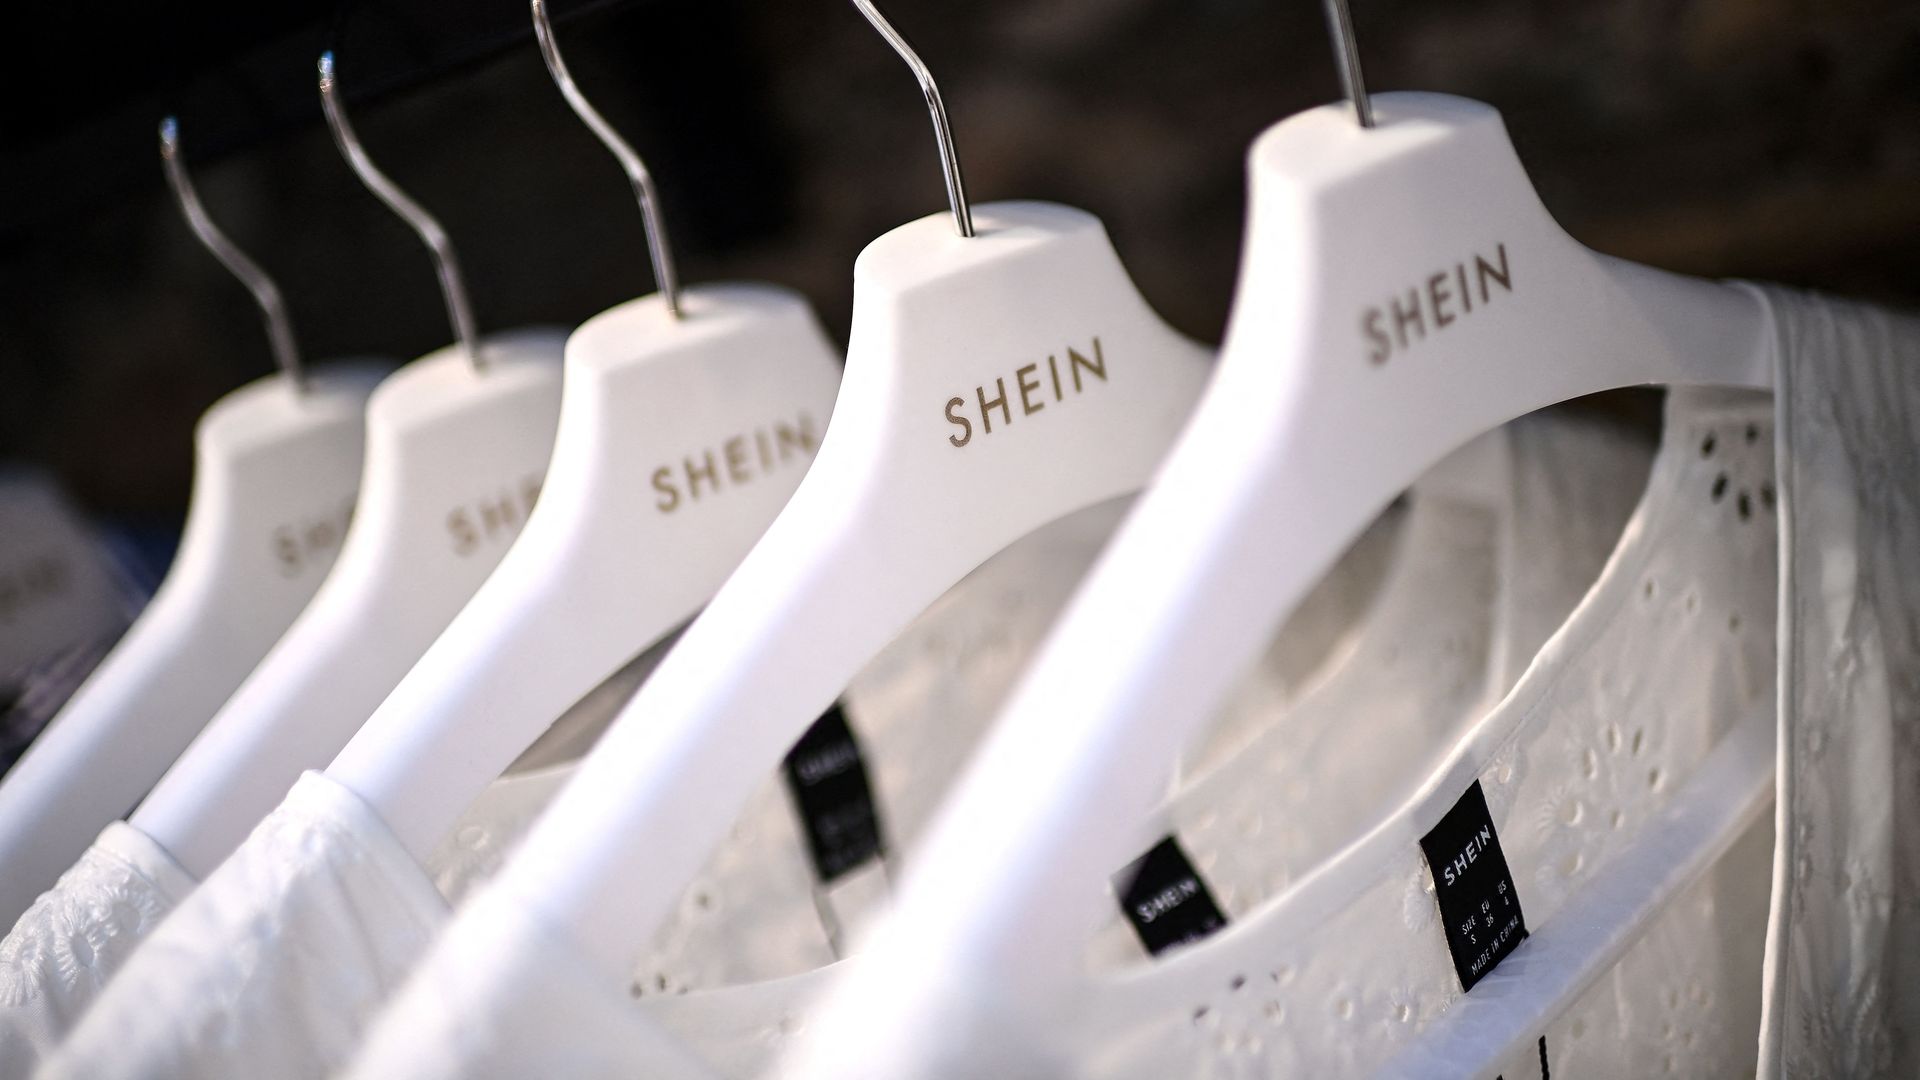 Shein lands in trouble, again